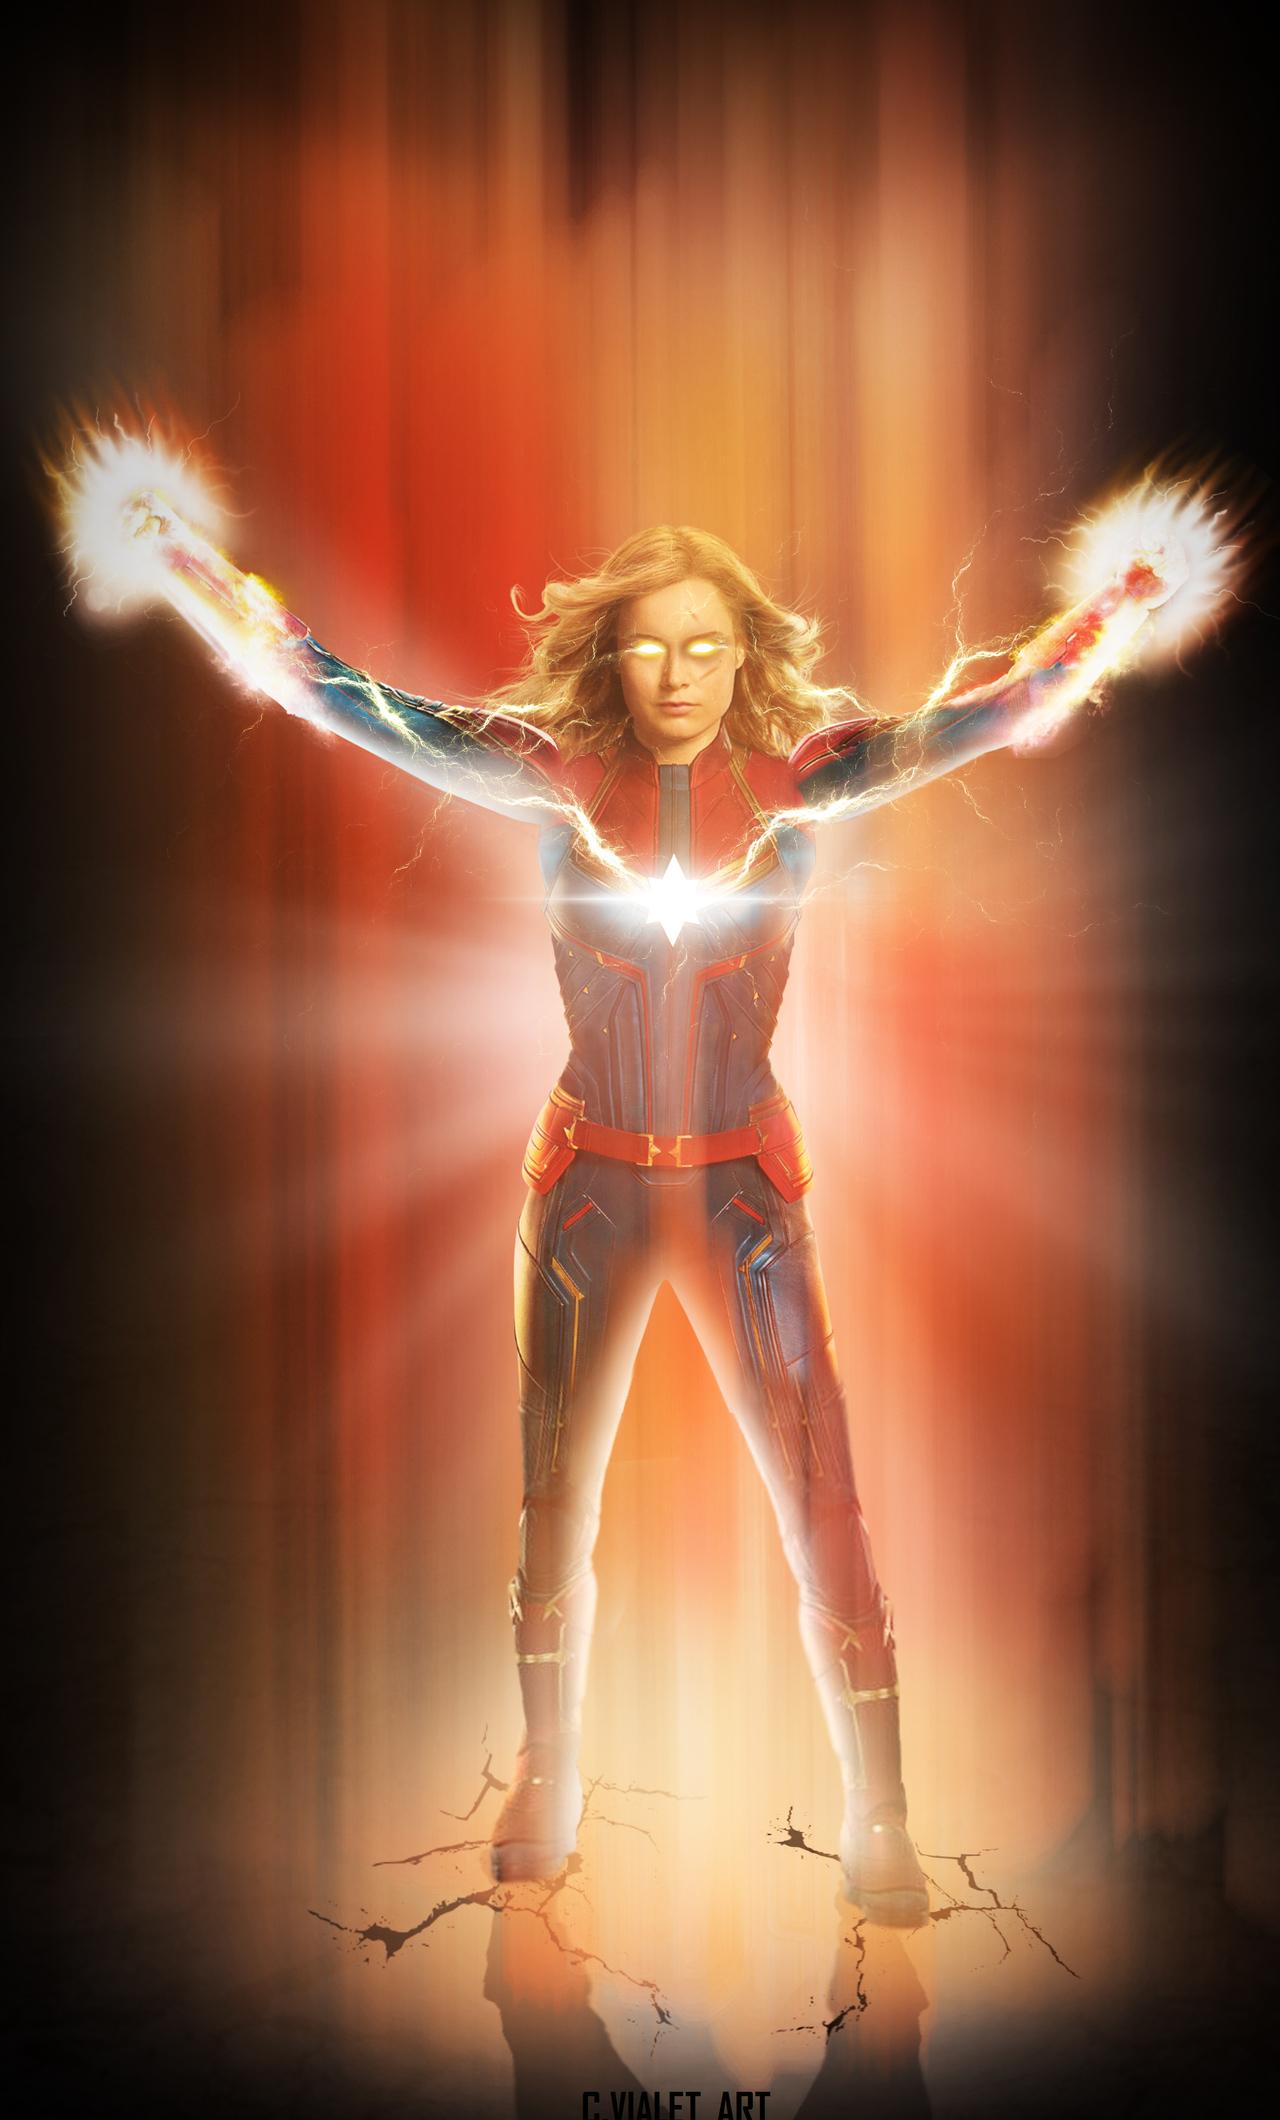 Captain Marvel Movie 2019 Wallpapers